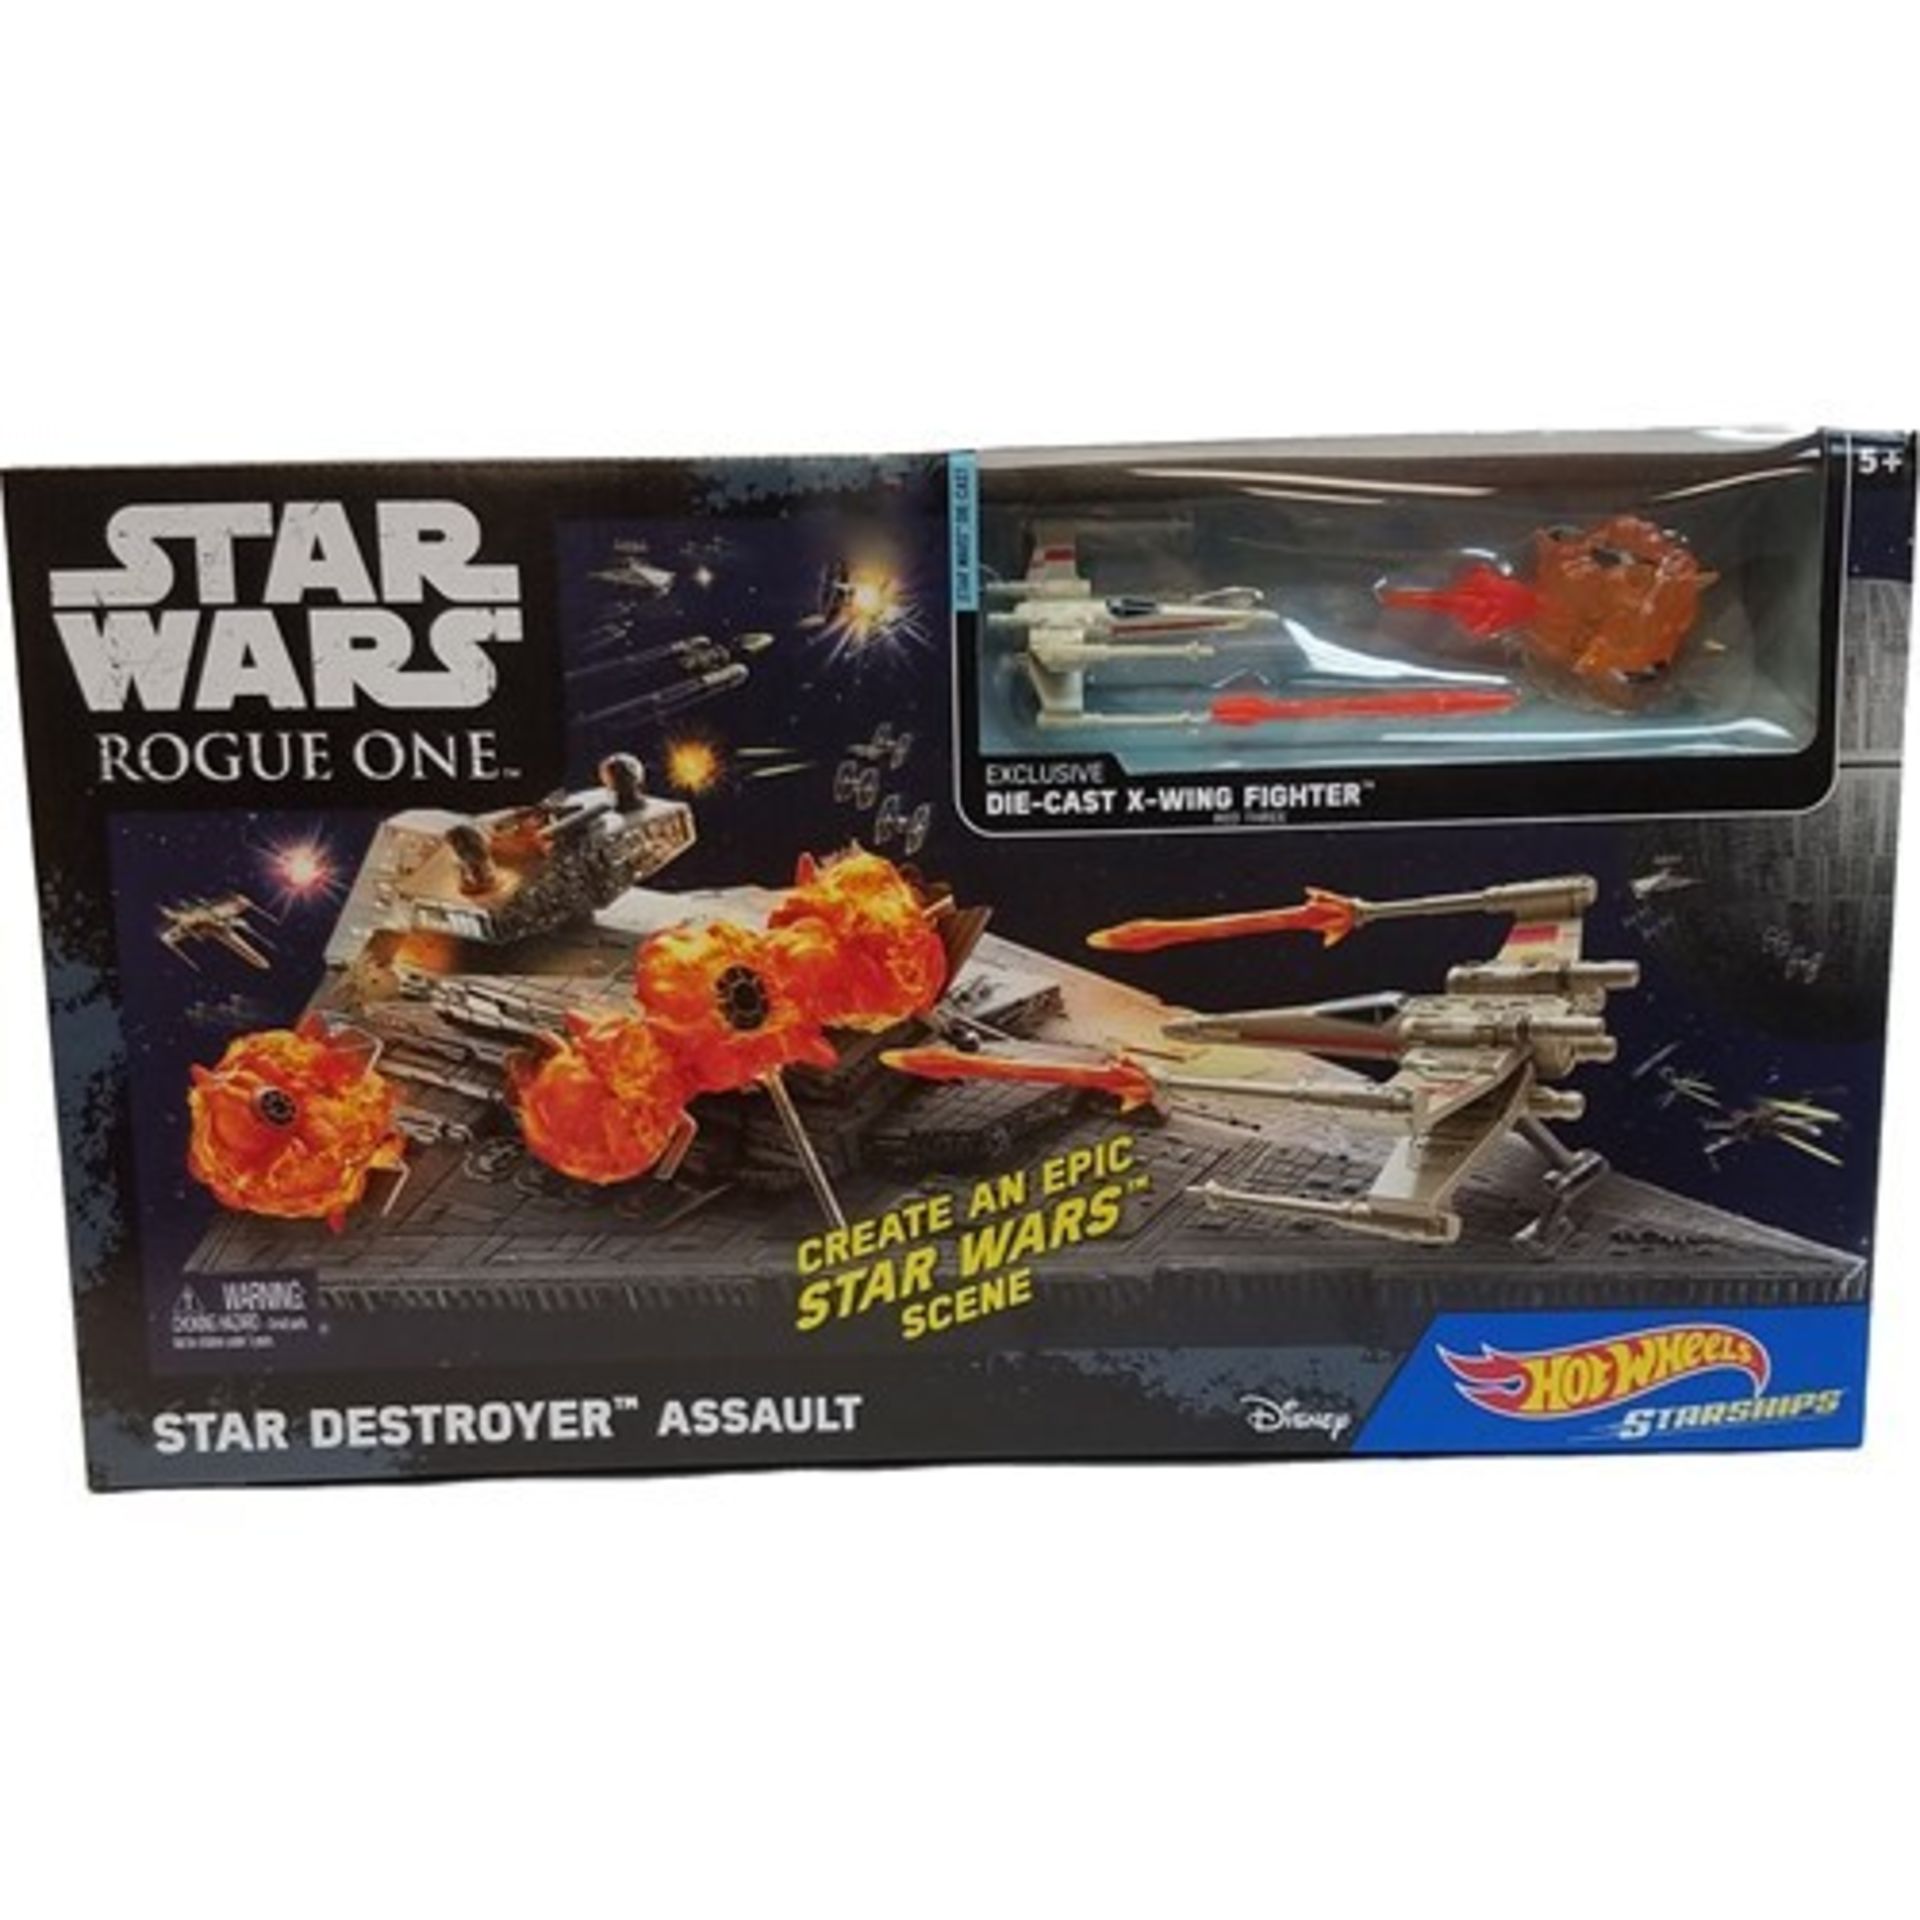 V Brand New Hot Wheels Star Wars Rogue One Star Destroyer Assault - 20 Pieces Included - Includes